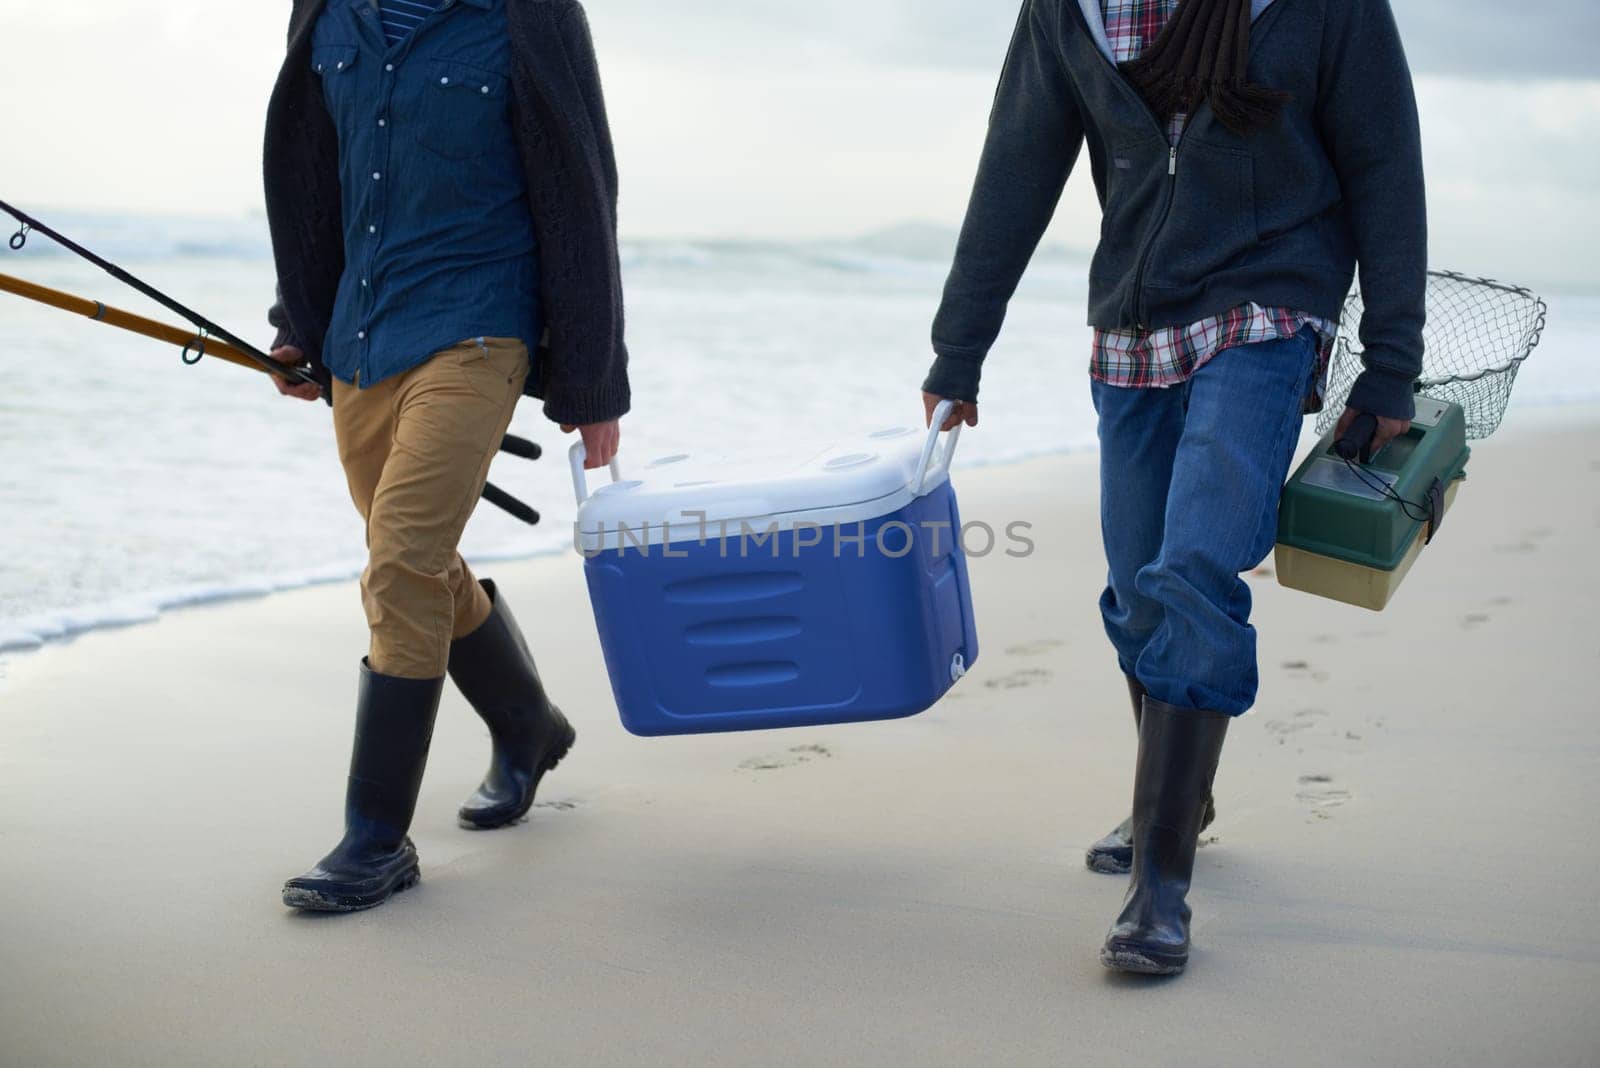 Carrying their tackle. Two fisherman carrying a cooler and a tackle box on the beach in the early morning. by YuriArcurs